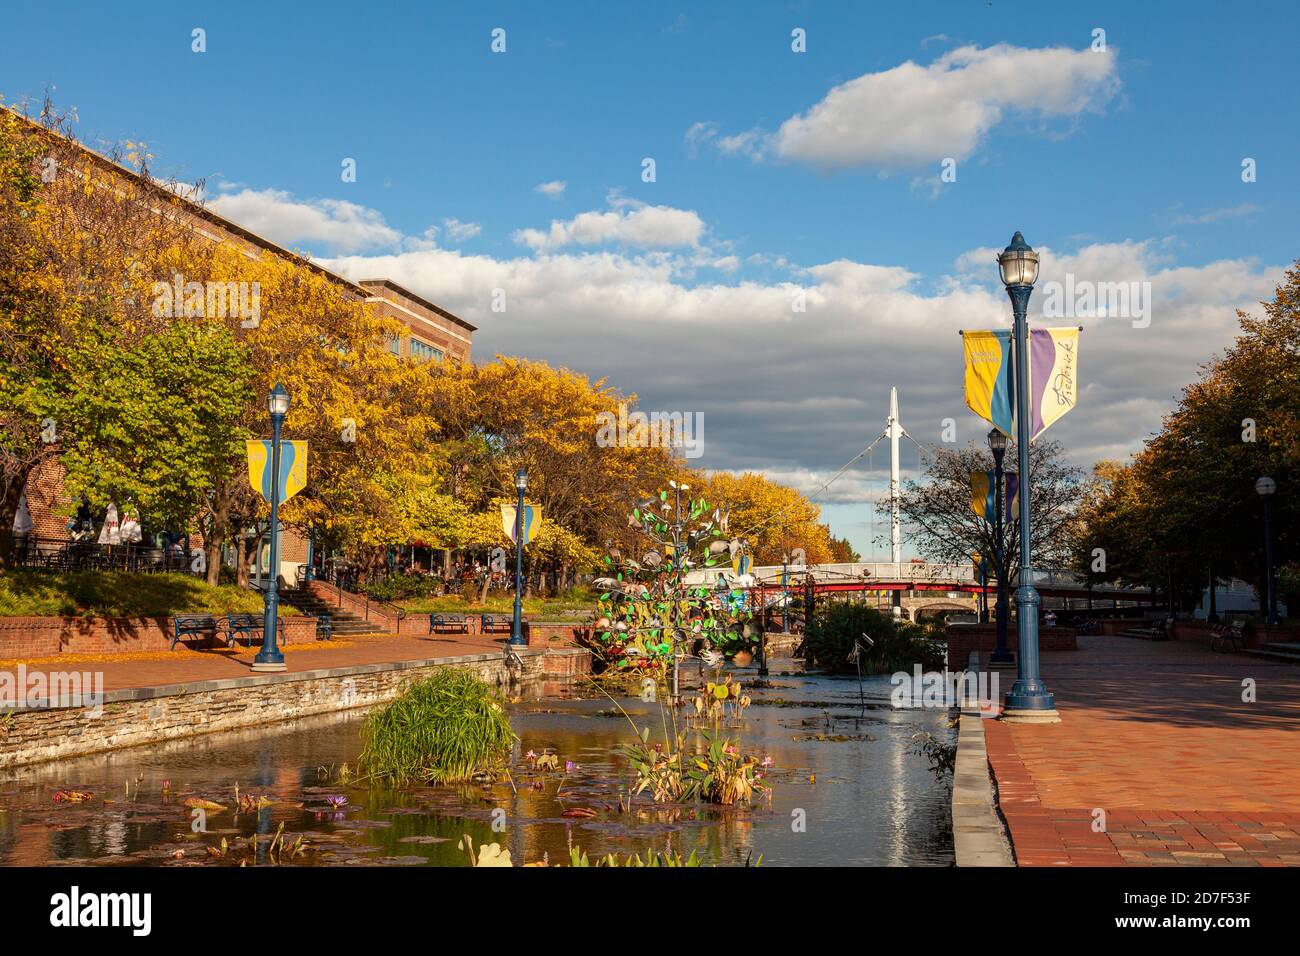 Frederick, MD, USA 10/13/2020: An afternoon view of the Carroll Creek Park, Frederick in autumn. A creek runs through cobblestone streets where people Stock Photo